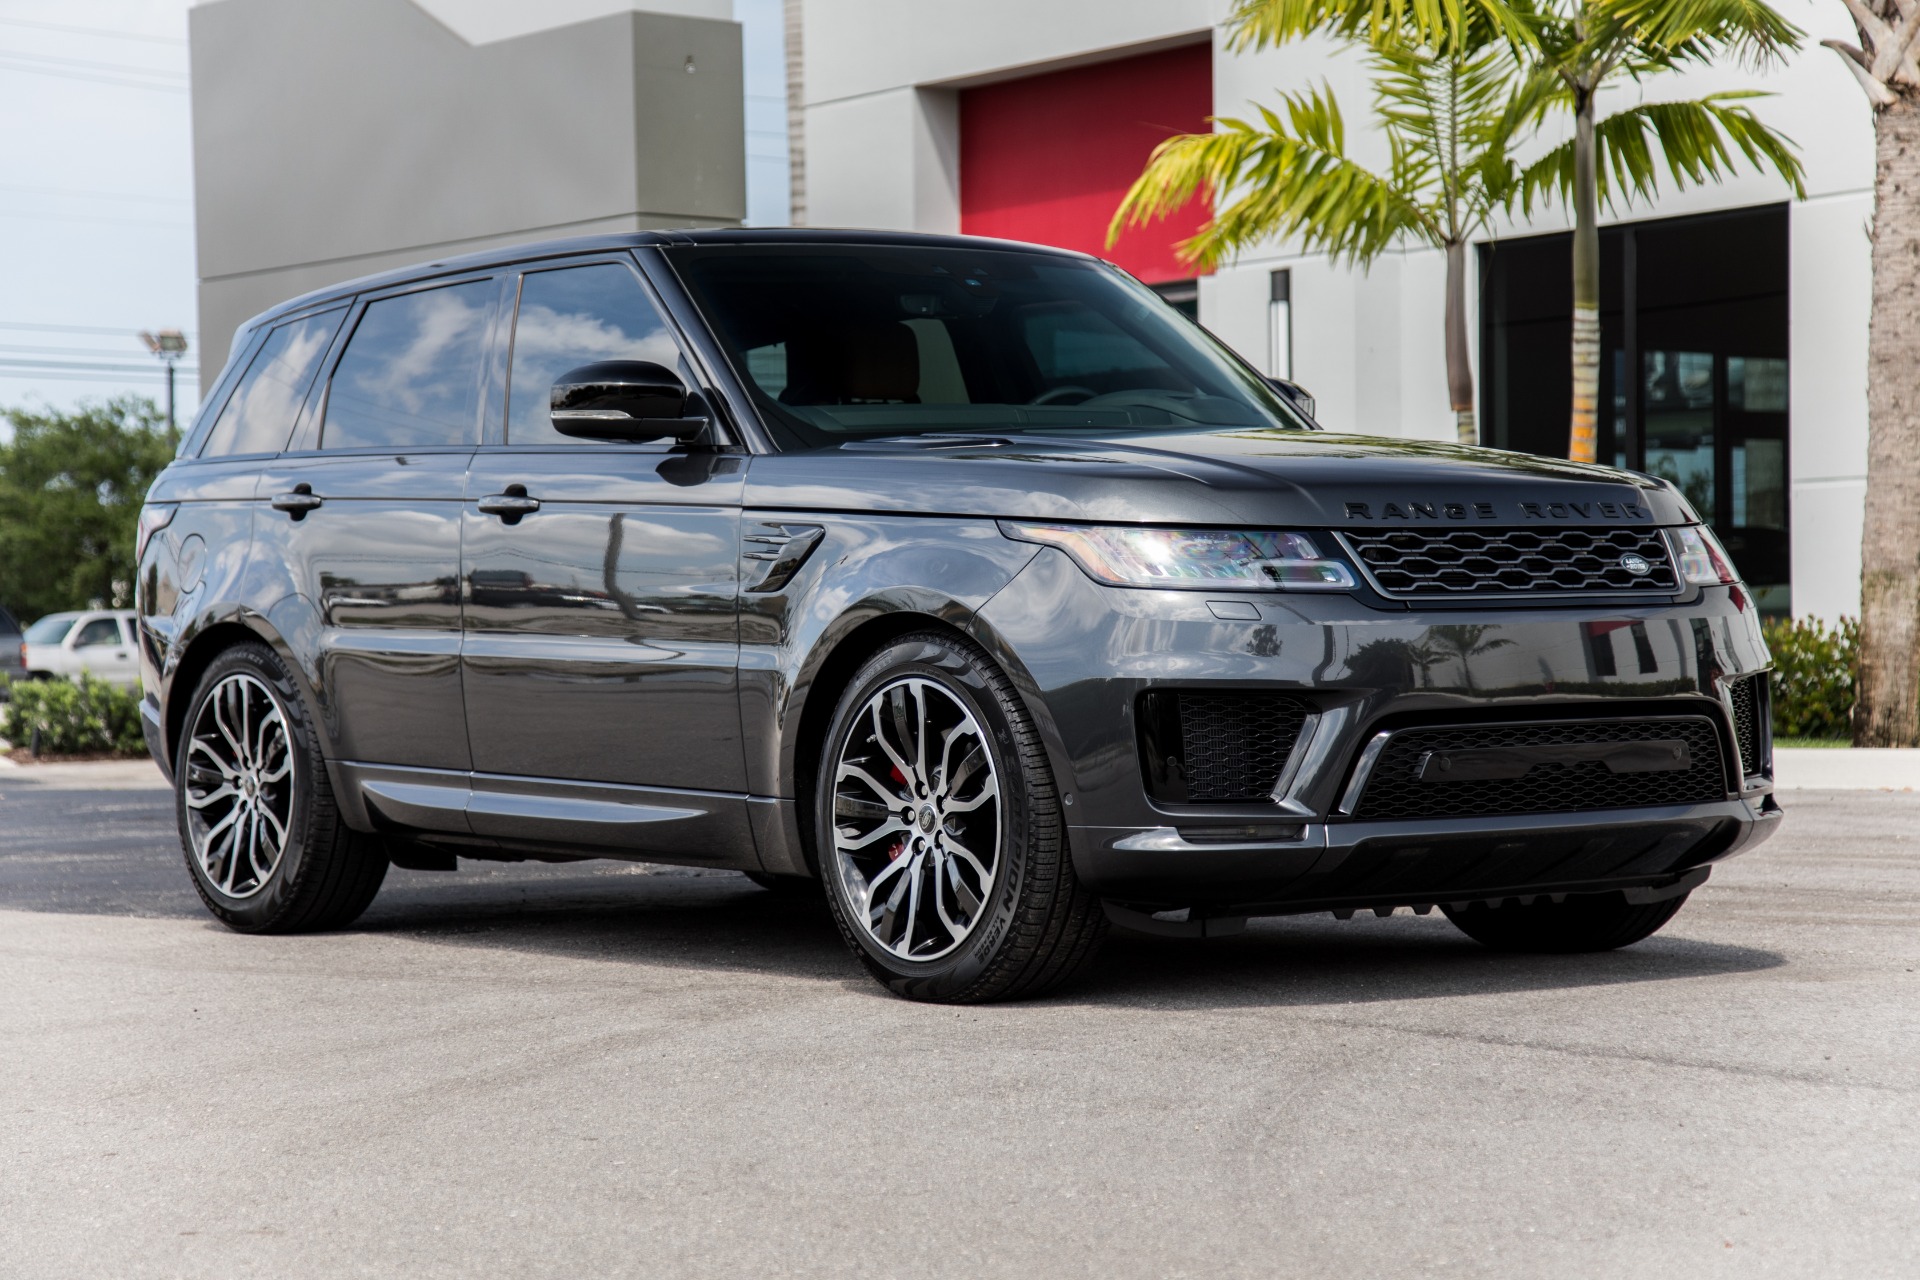 This Is The New Range Rover Sport Black Edition Top Gear, 54% OFF